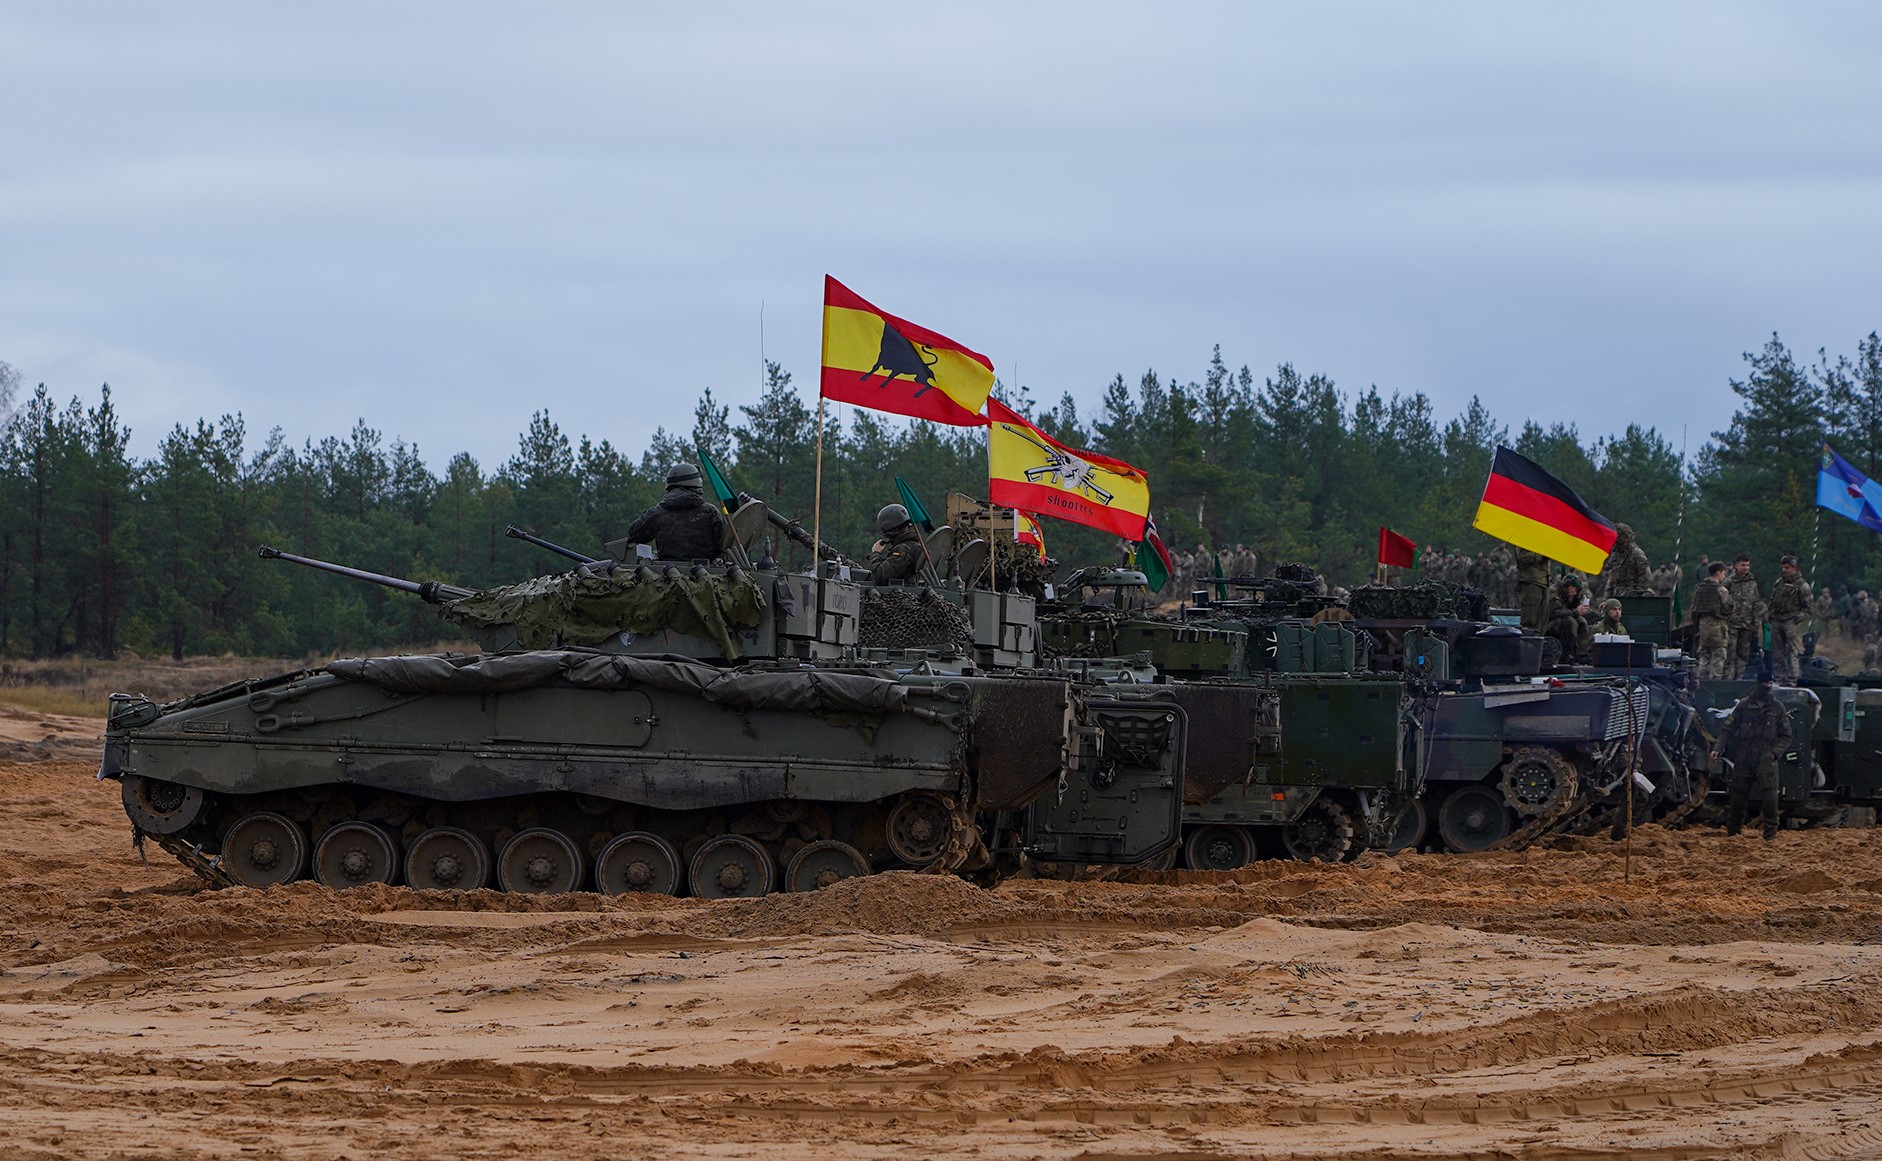 Vehicles participating in the exercise